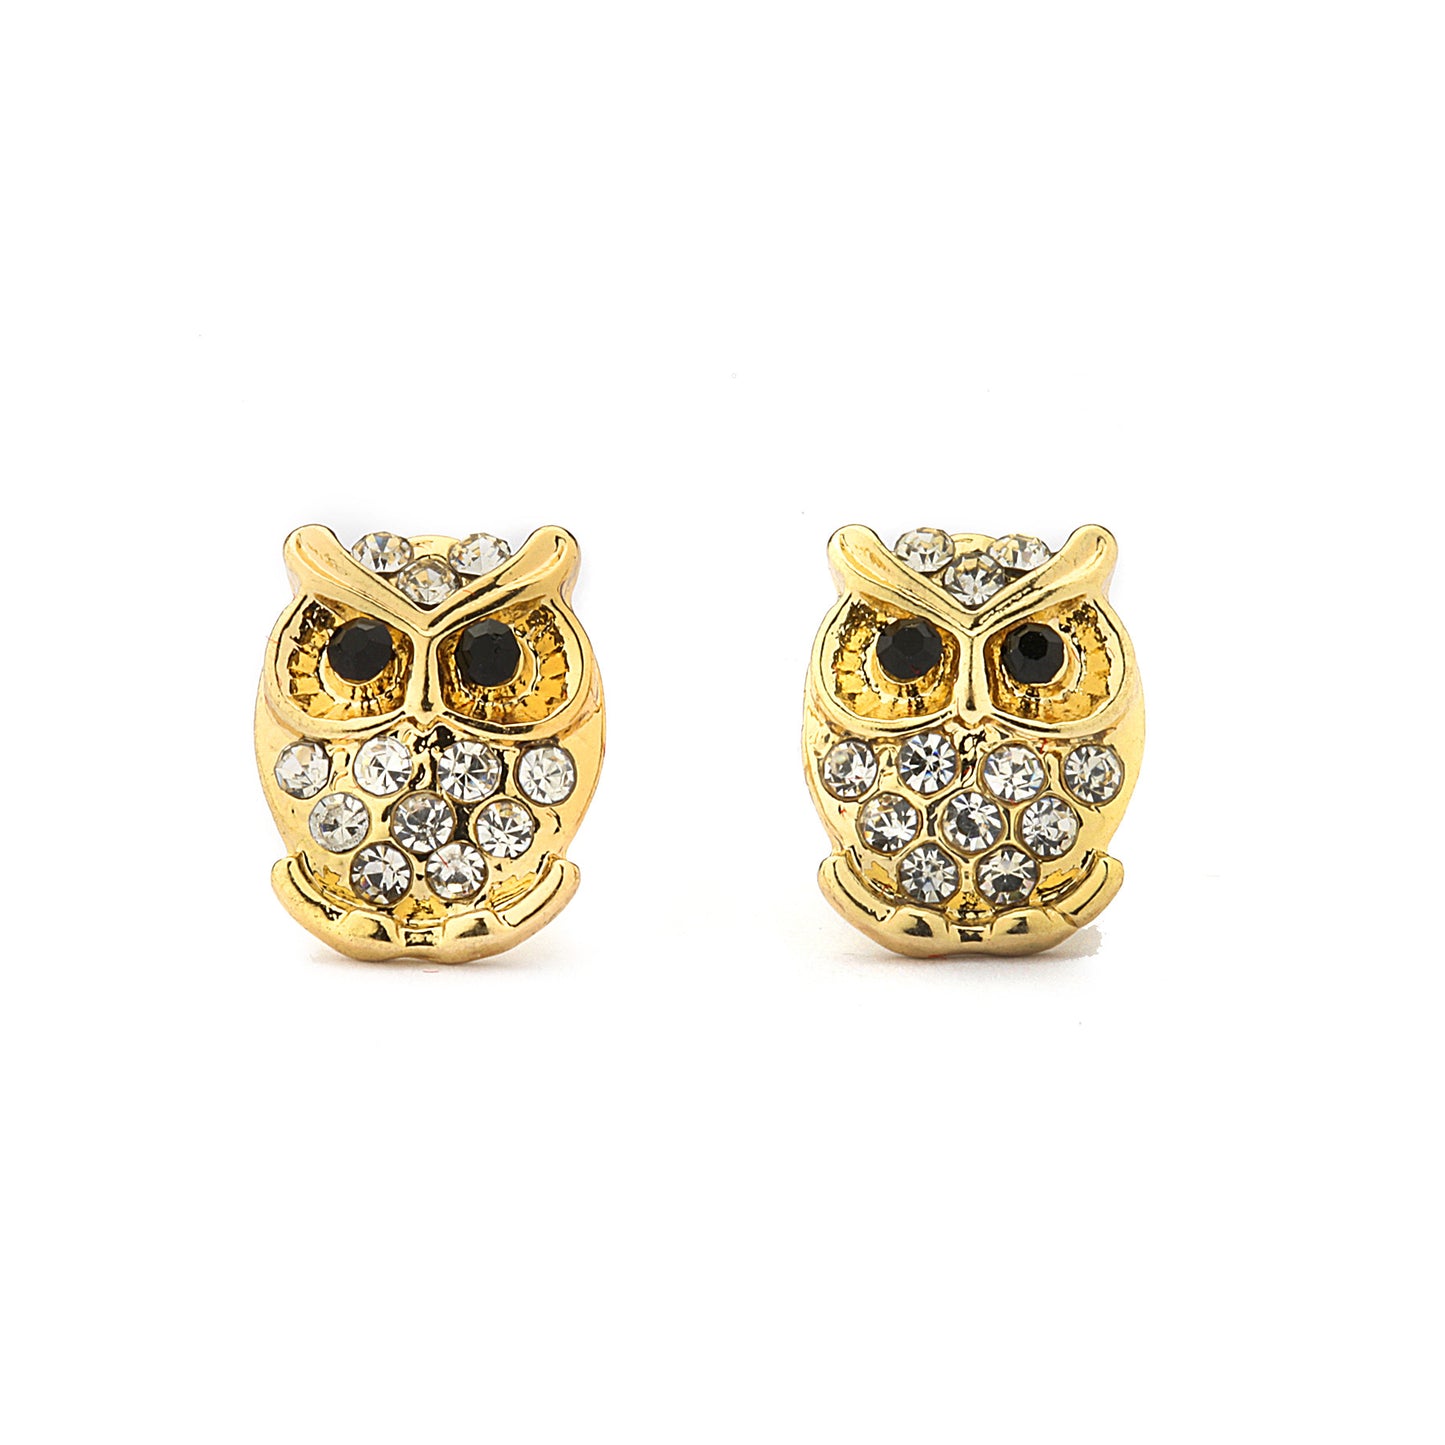 Owl Earrings with Pave CZ Accents 14-K Gold Filled